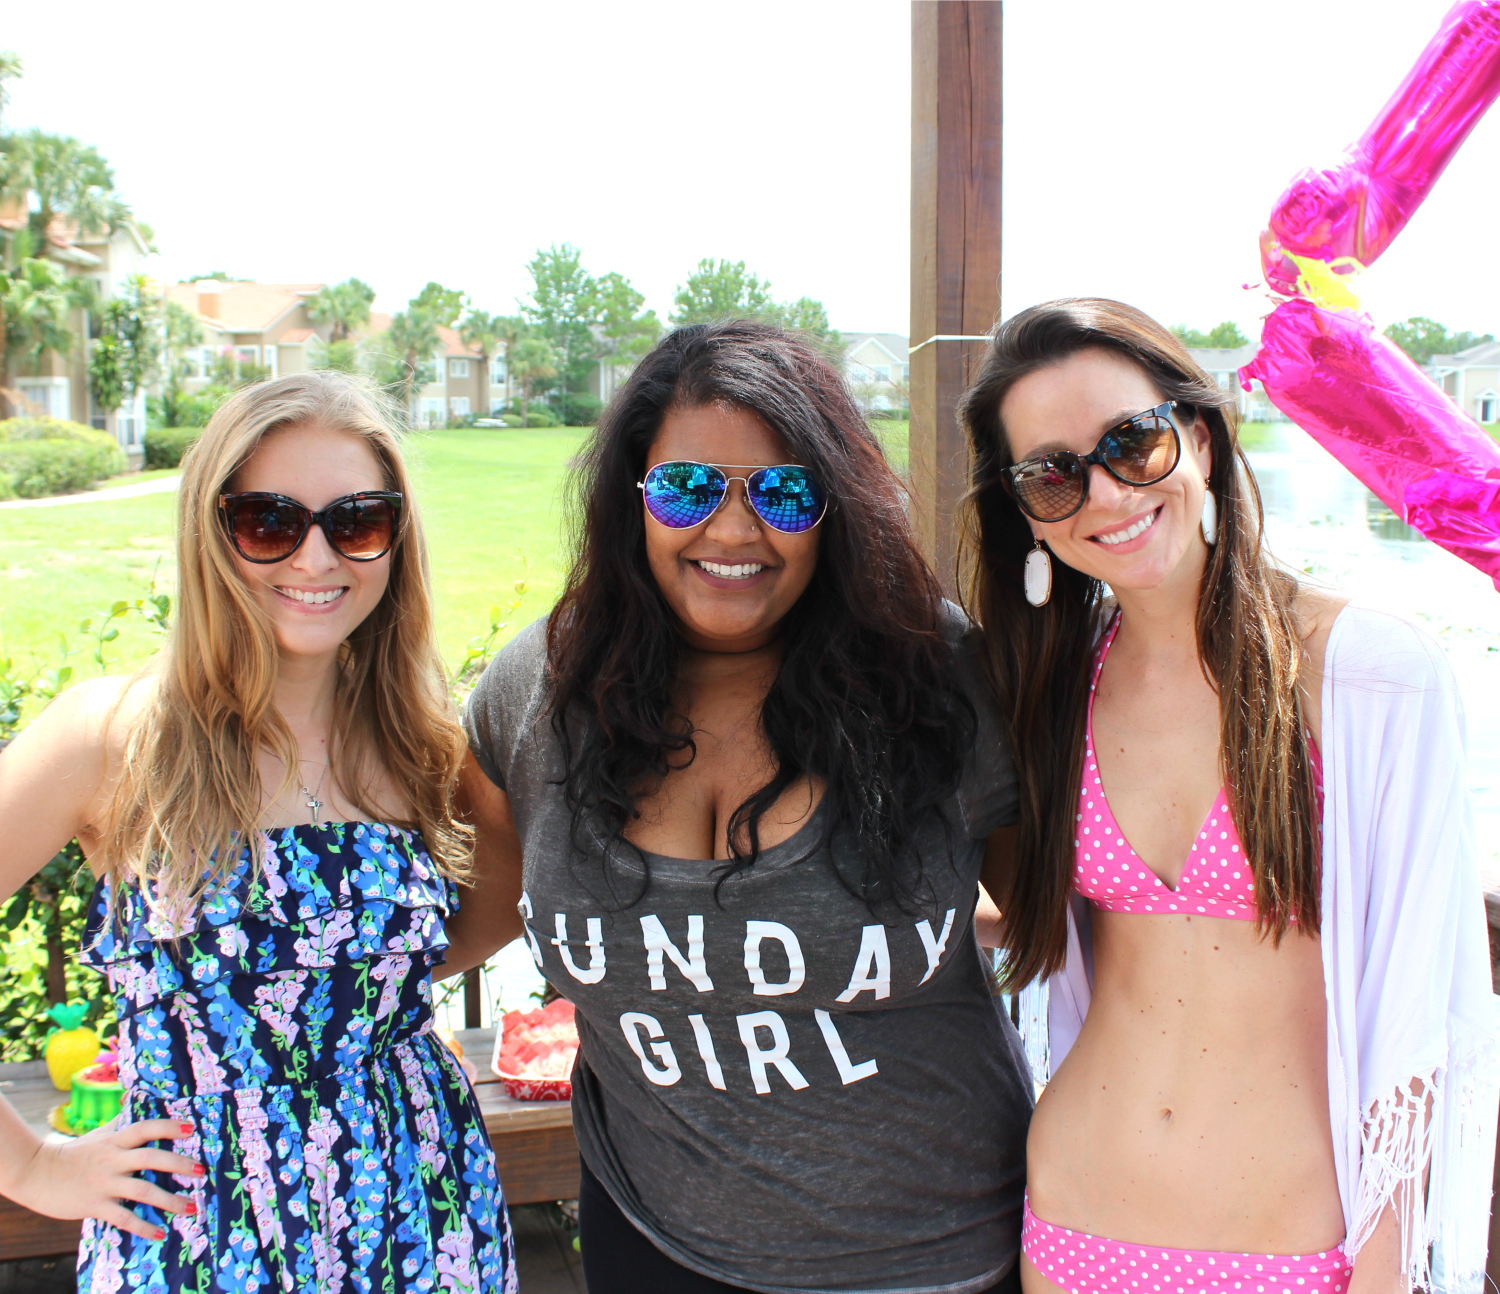 Cute summer pool party ideas for adults